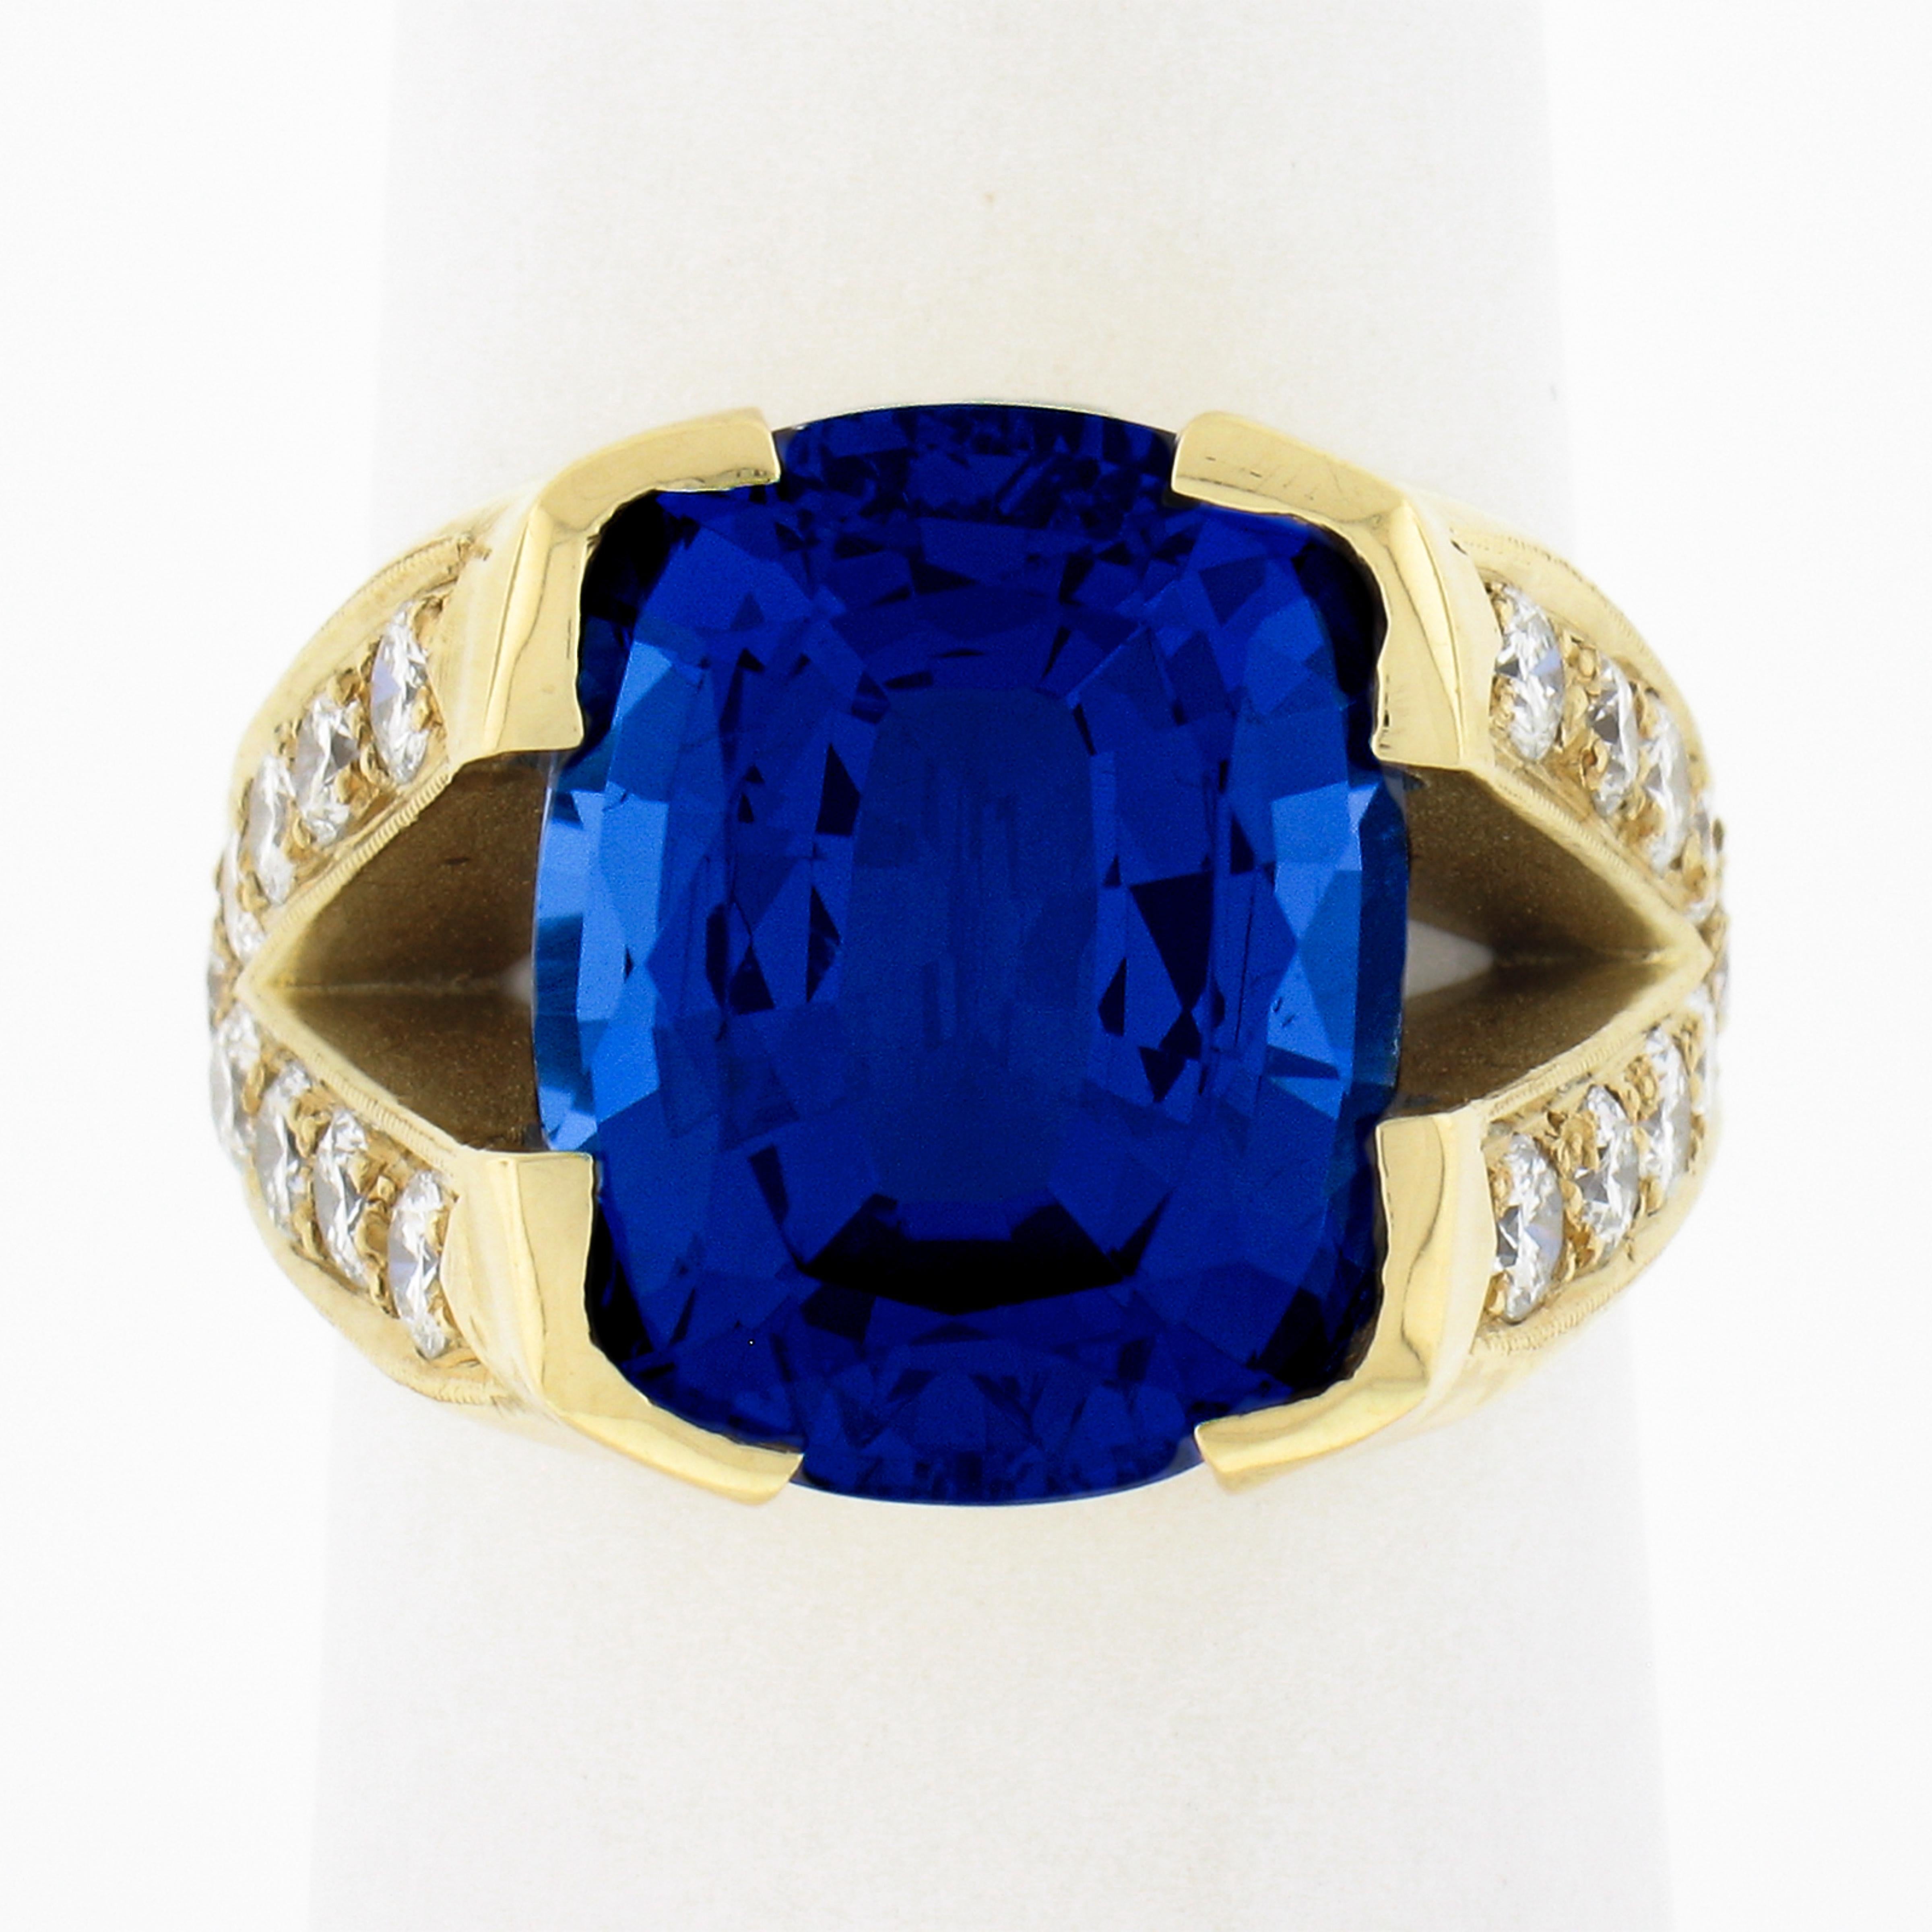 Here we have a truly jaw dropping and very well made cocktail ring that is crafted from solid 18k yellow gold. This special ring features a GIA certified natural tanzanite that is perfectly accented with numerous fiery diamonds arranged in a 